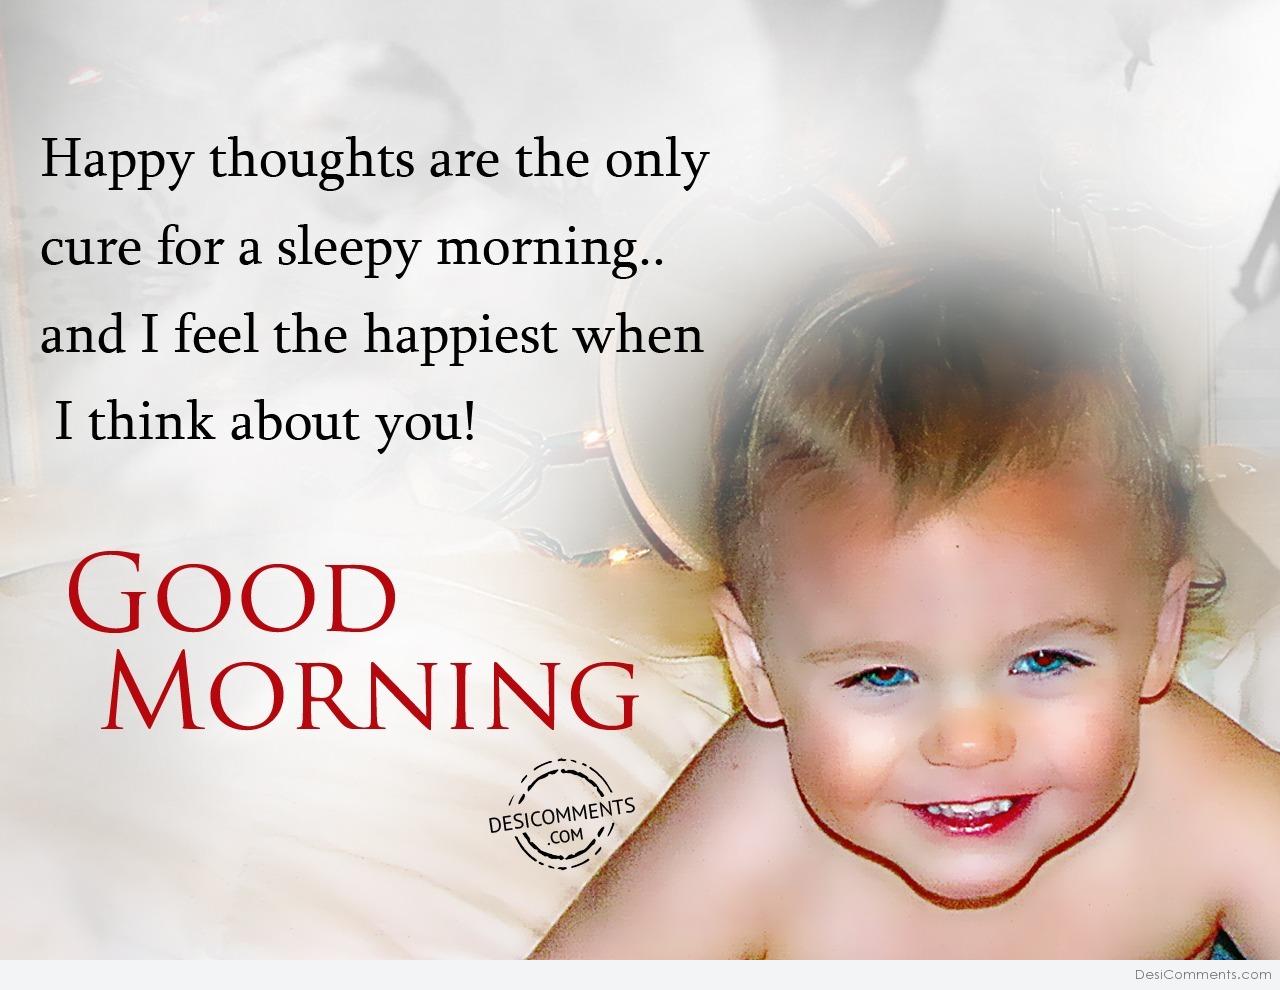 Good Morning – Happythoughts